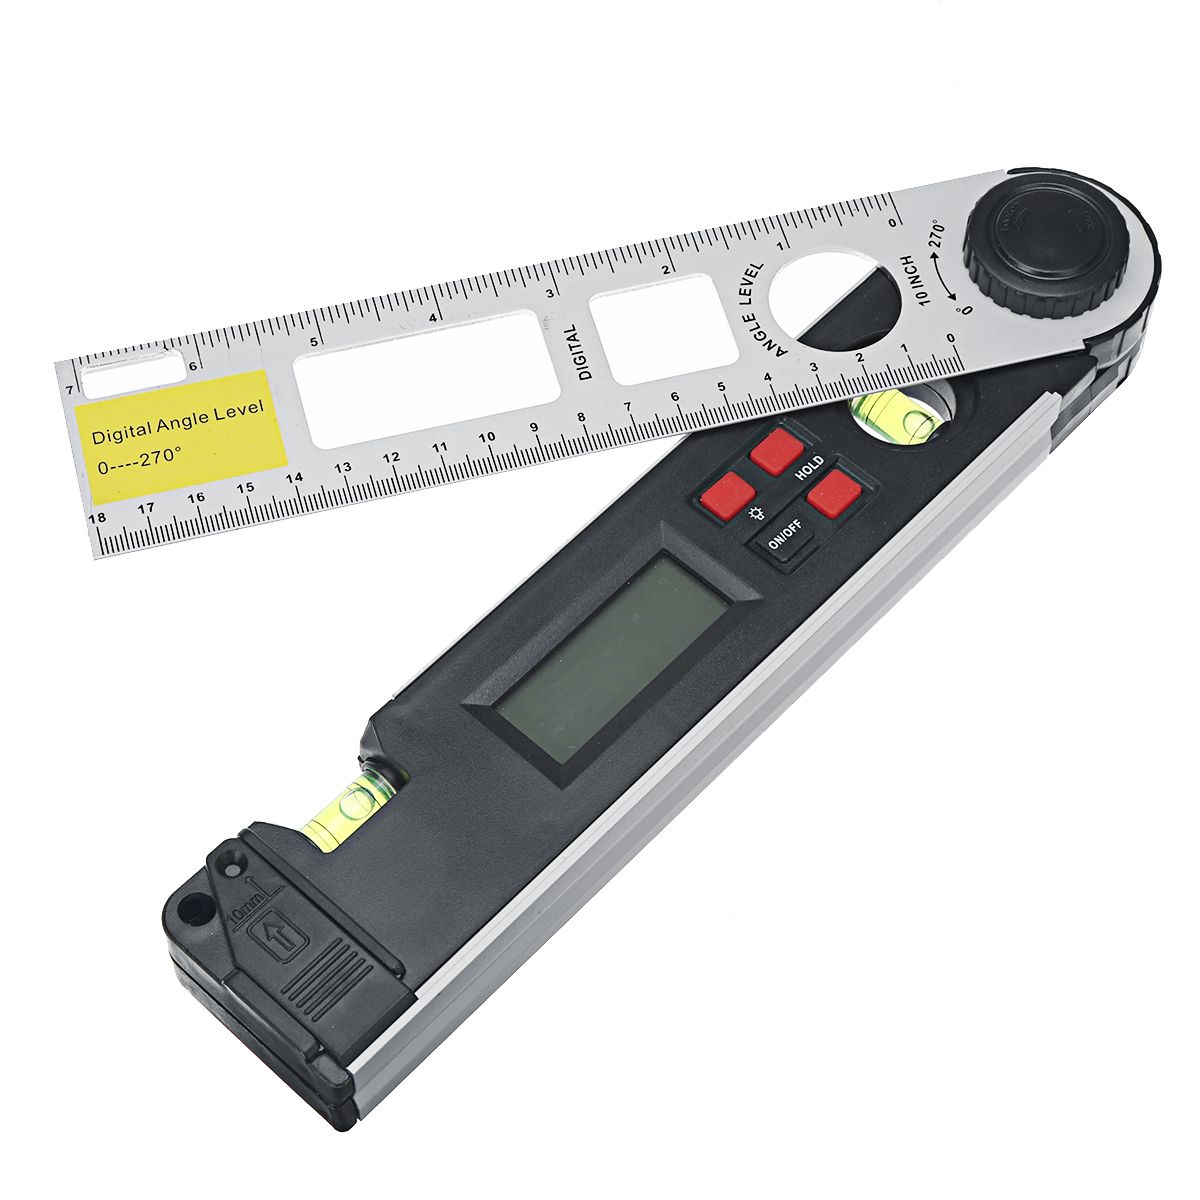 250400mm-Digital-Angle-Level-Meter-LCD-Display-0-225-Degree-for-Measuring-Roof-Angles-Fitting-Up-Win-1740234